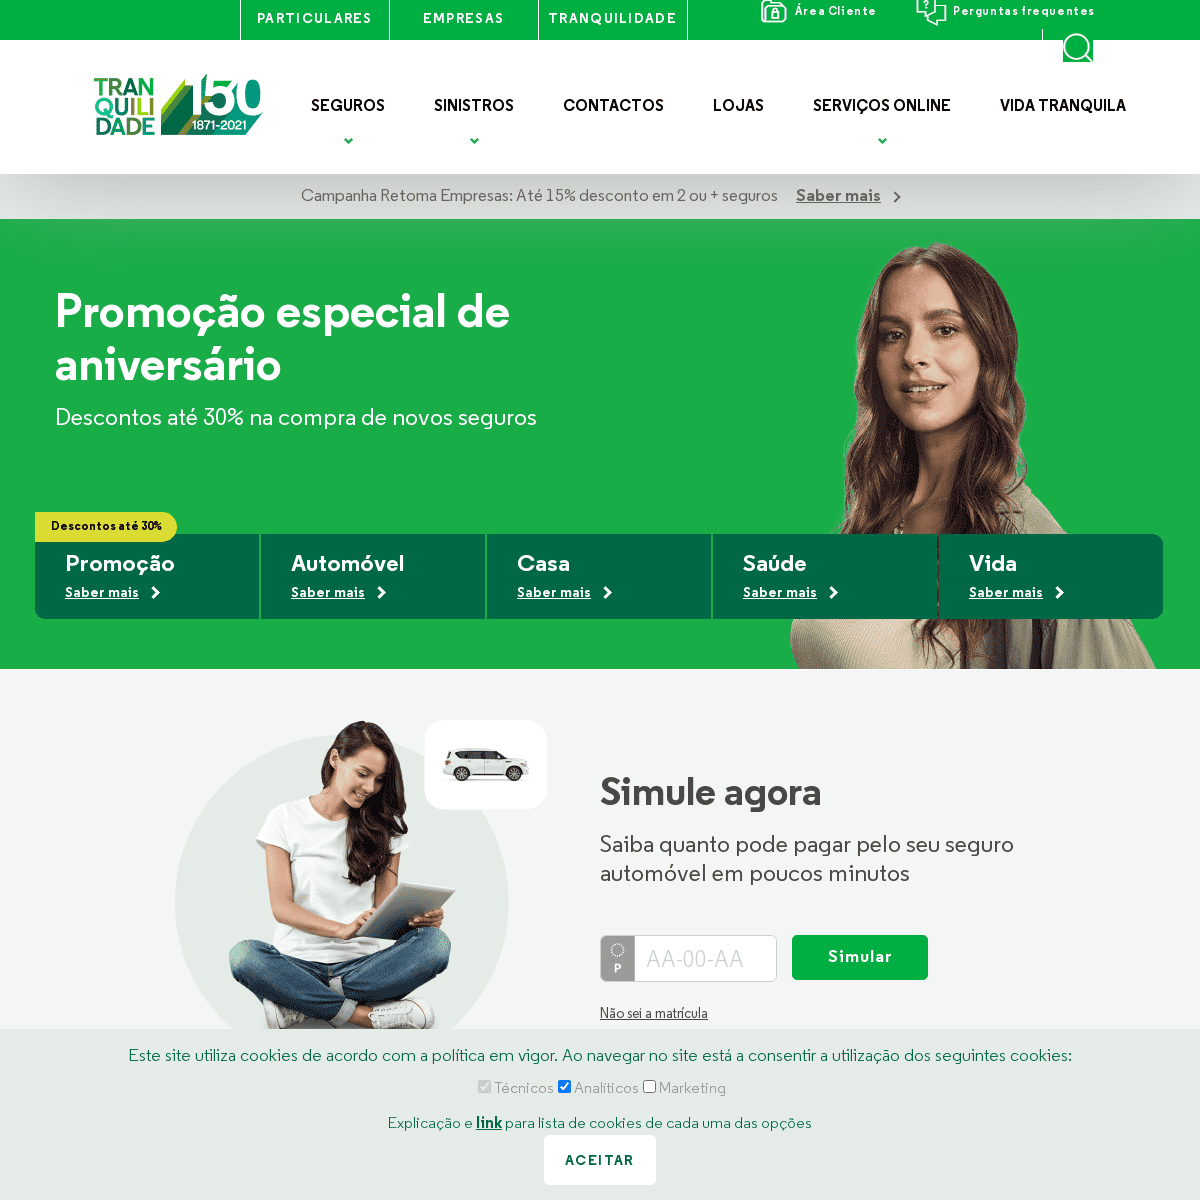 A complete backup of https://tranquilidade.pt